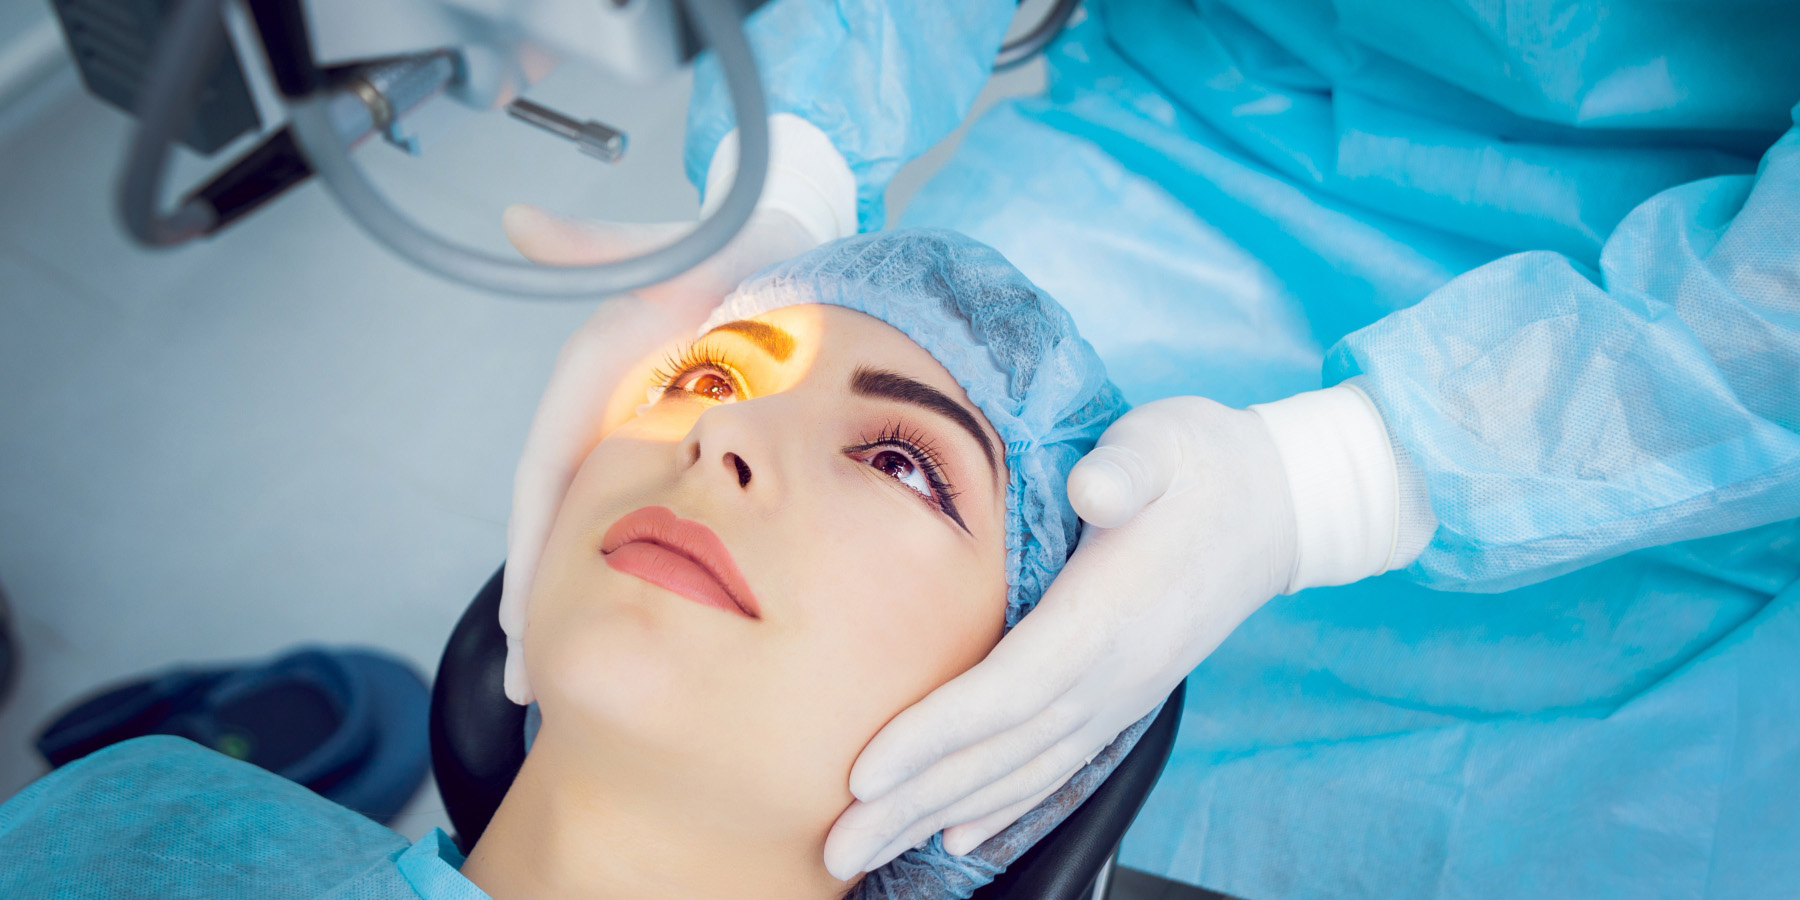 Cataract Surgery Singapore: What to Expect From Cataract Surgery?